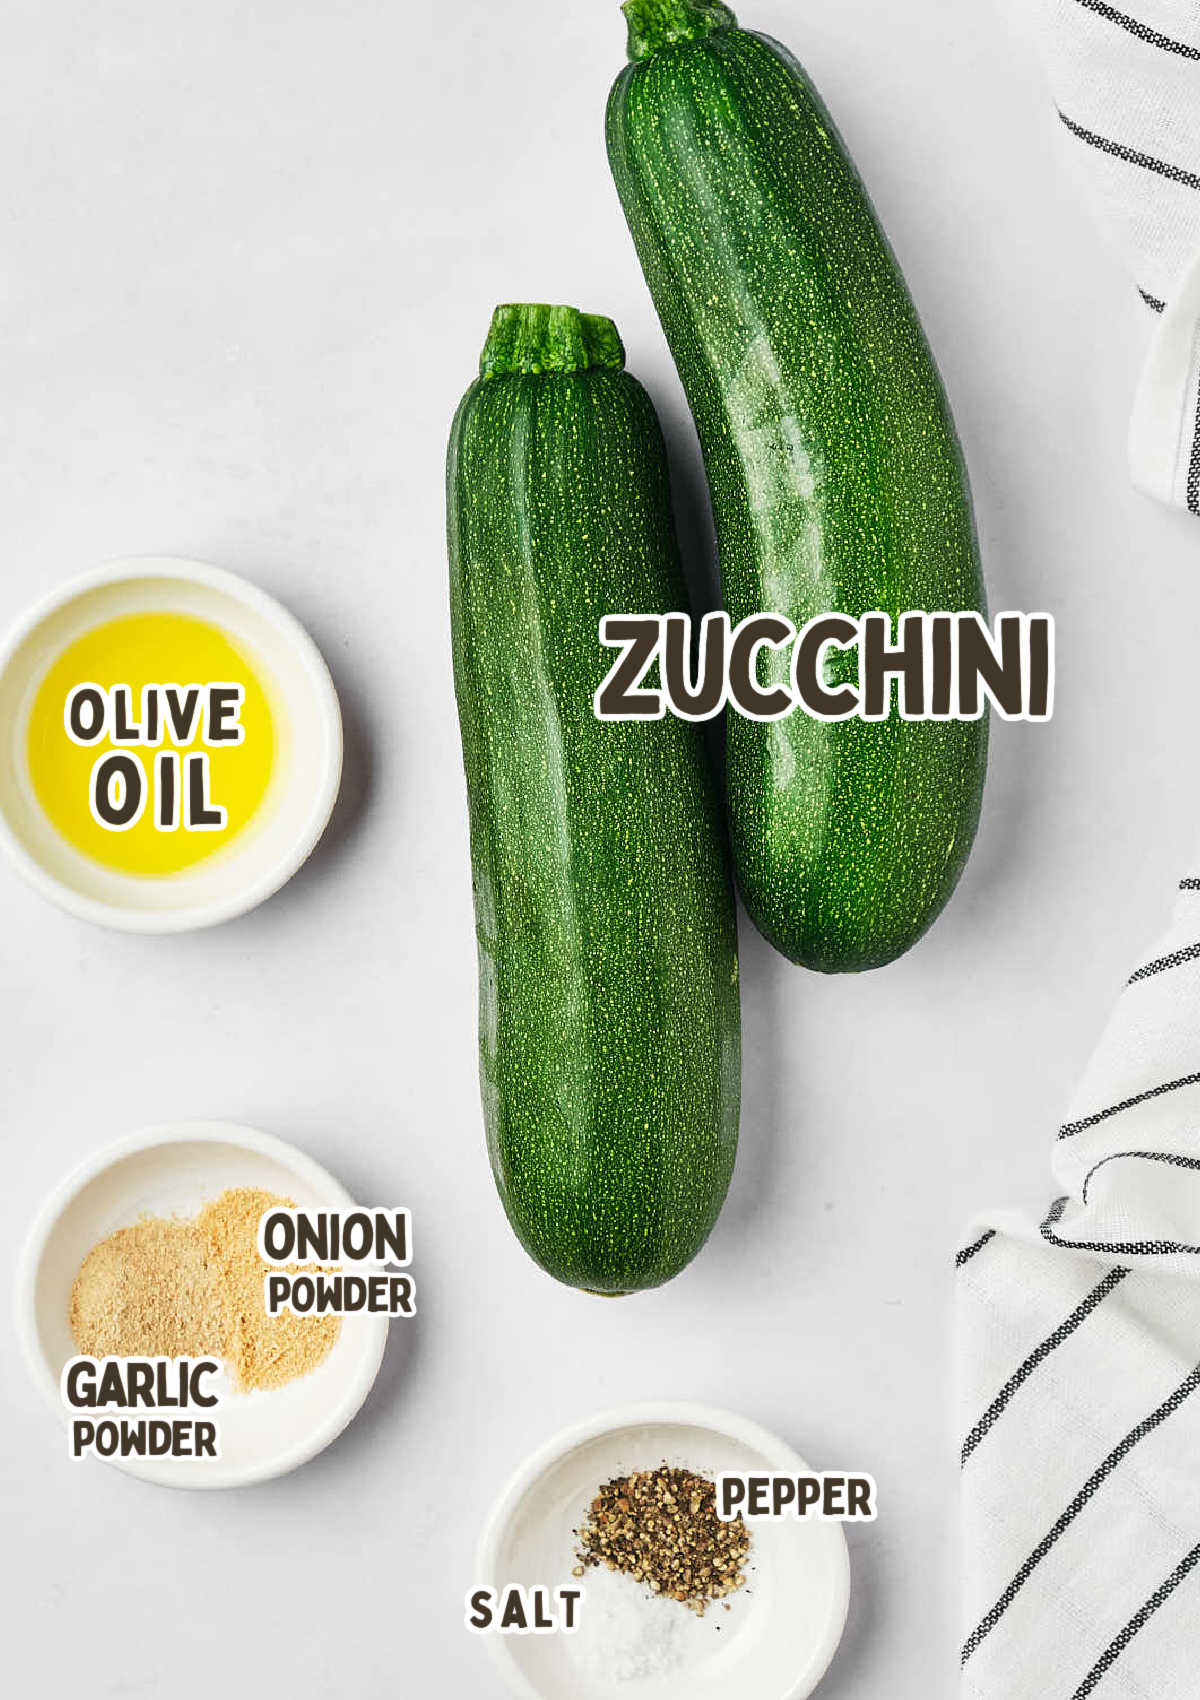 Ingredients for Air Fryer Zucchini on a counter.